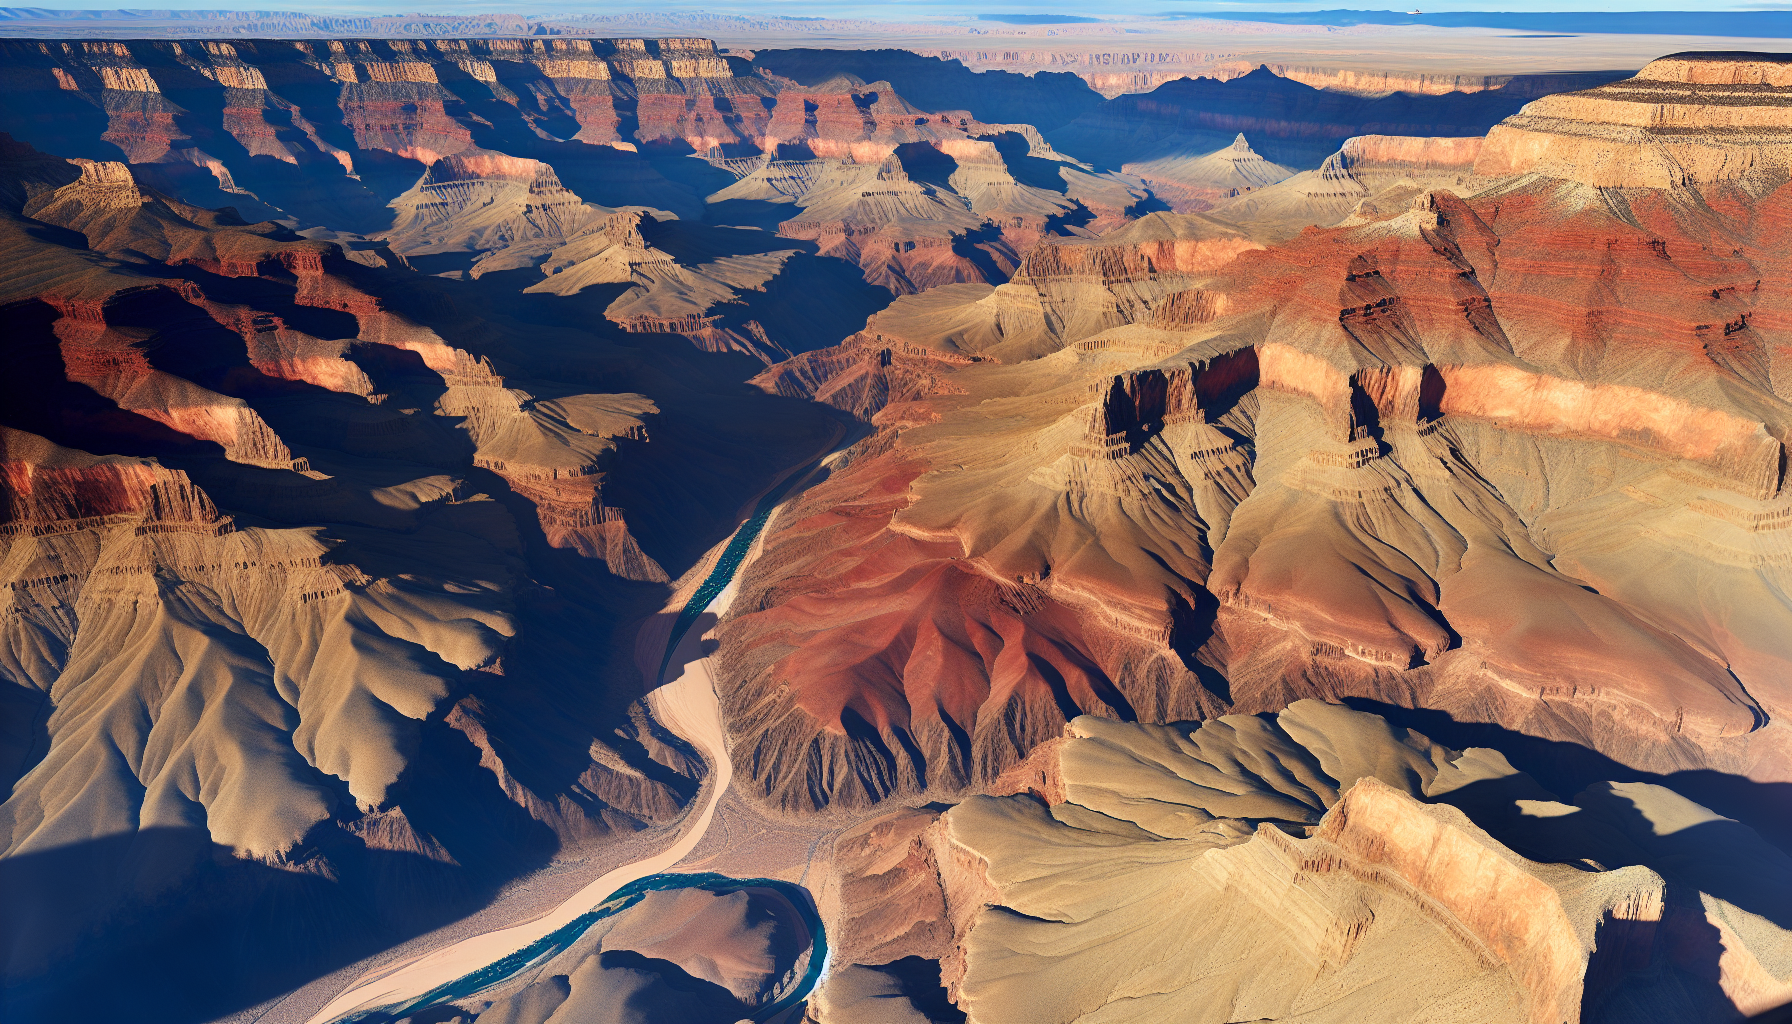 Thrilling helicopter tour of the Grand Canyon's West Rim